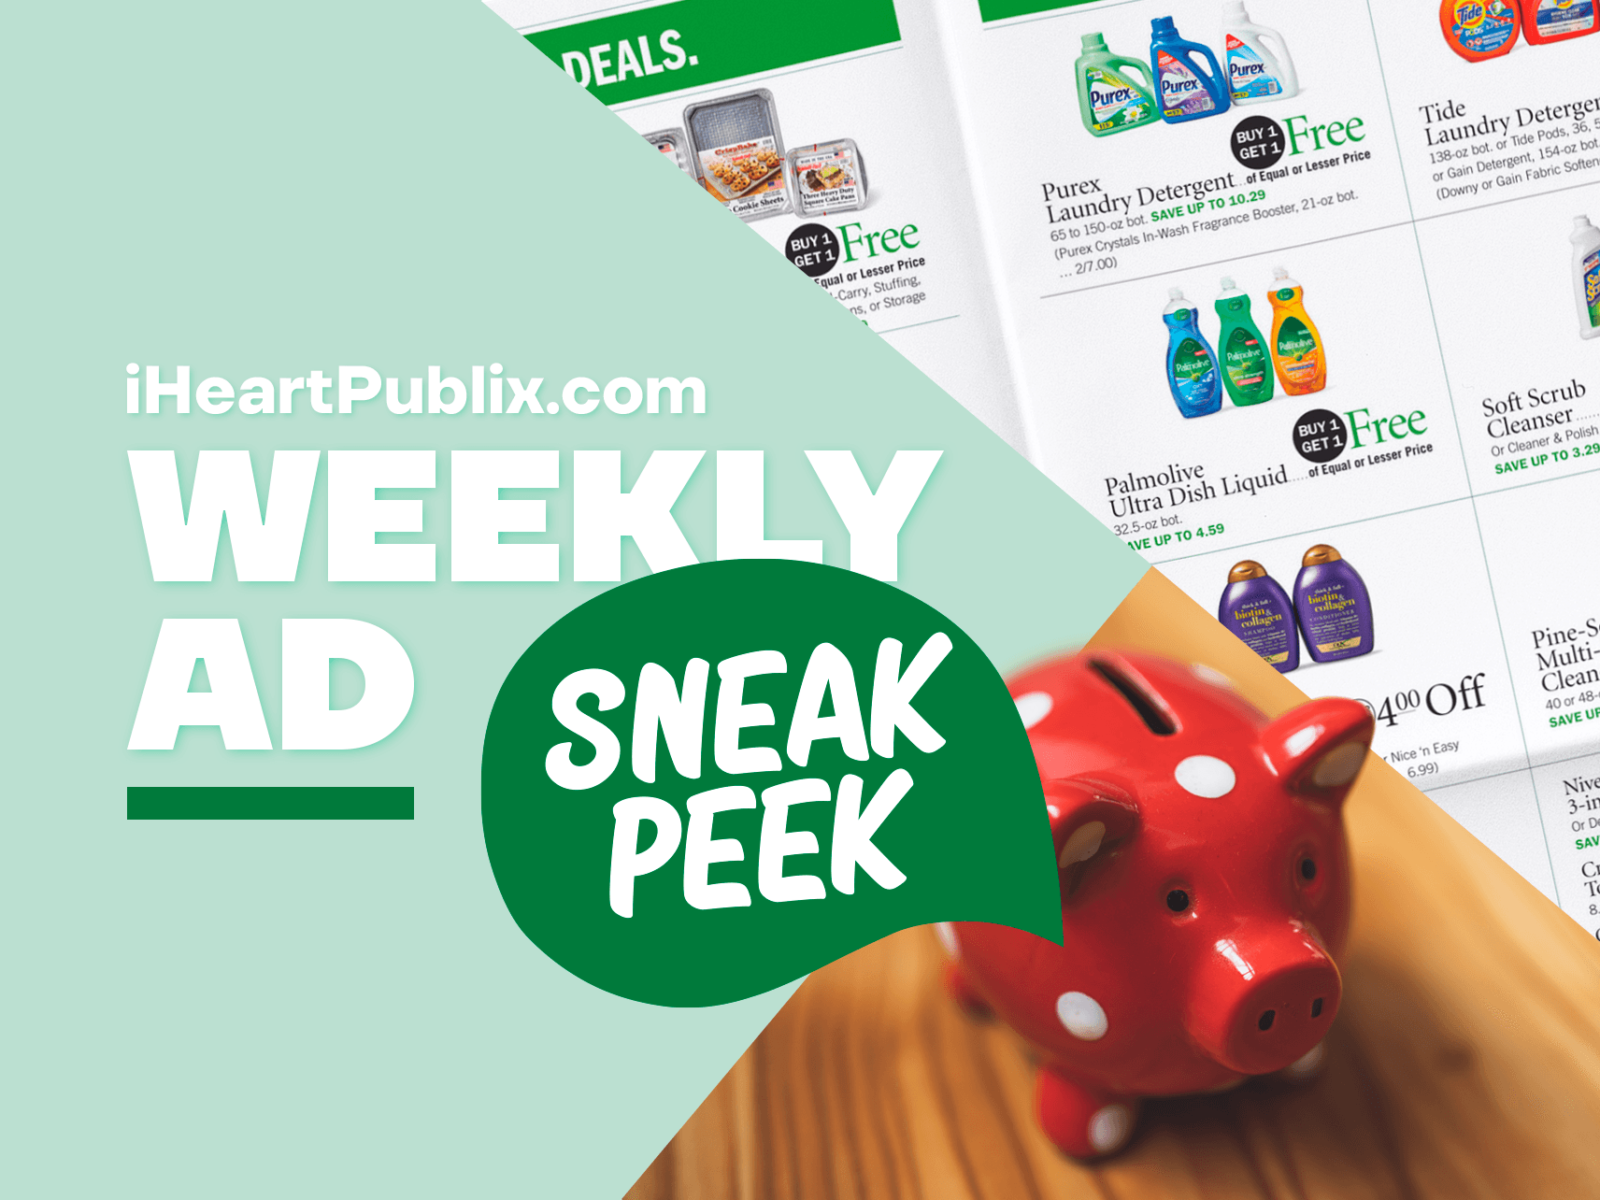 Publix Ad & Coupons Week Of 8/18 to 8/24 (8/17 to 8/23 For Some)